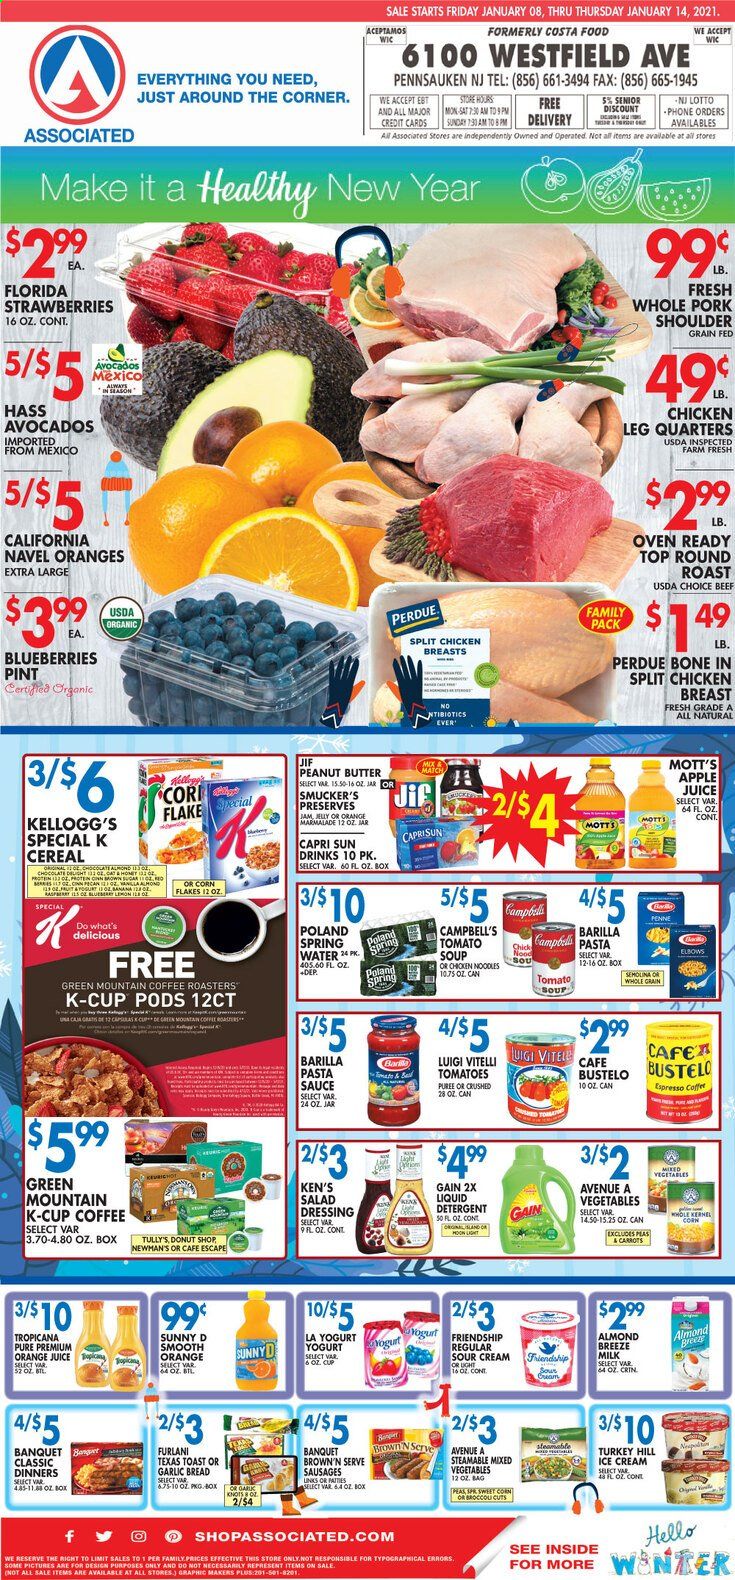 thumbnail - Associated Supermarkets Flyer - 01/08/2021 - 01/14/2021 - Sales products - blueberries, bread, toast bread, Campbell's, tomato soup, soup, sauce, Barilla, Perdue®, sausage, yoghurt, jelly, Almond Breeze, milk, sour cream, carrots, strawberries, Kellogg's, semolina, cereals, corn flakes, noodles, penne, salad dressing, pasta sauce, dressing, fruit jam, peanut butter, Jif, Capri Sun, orange juice, juice, Mott's, spring water, coffee, coffee capsules, K-Cups, Green Mountain, chicken breasts, beef meat, round roast, pork meat, pork shoulder, detergent, Gain, liquid detergent, avocado. Page 1.